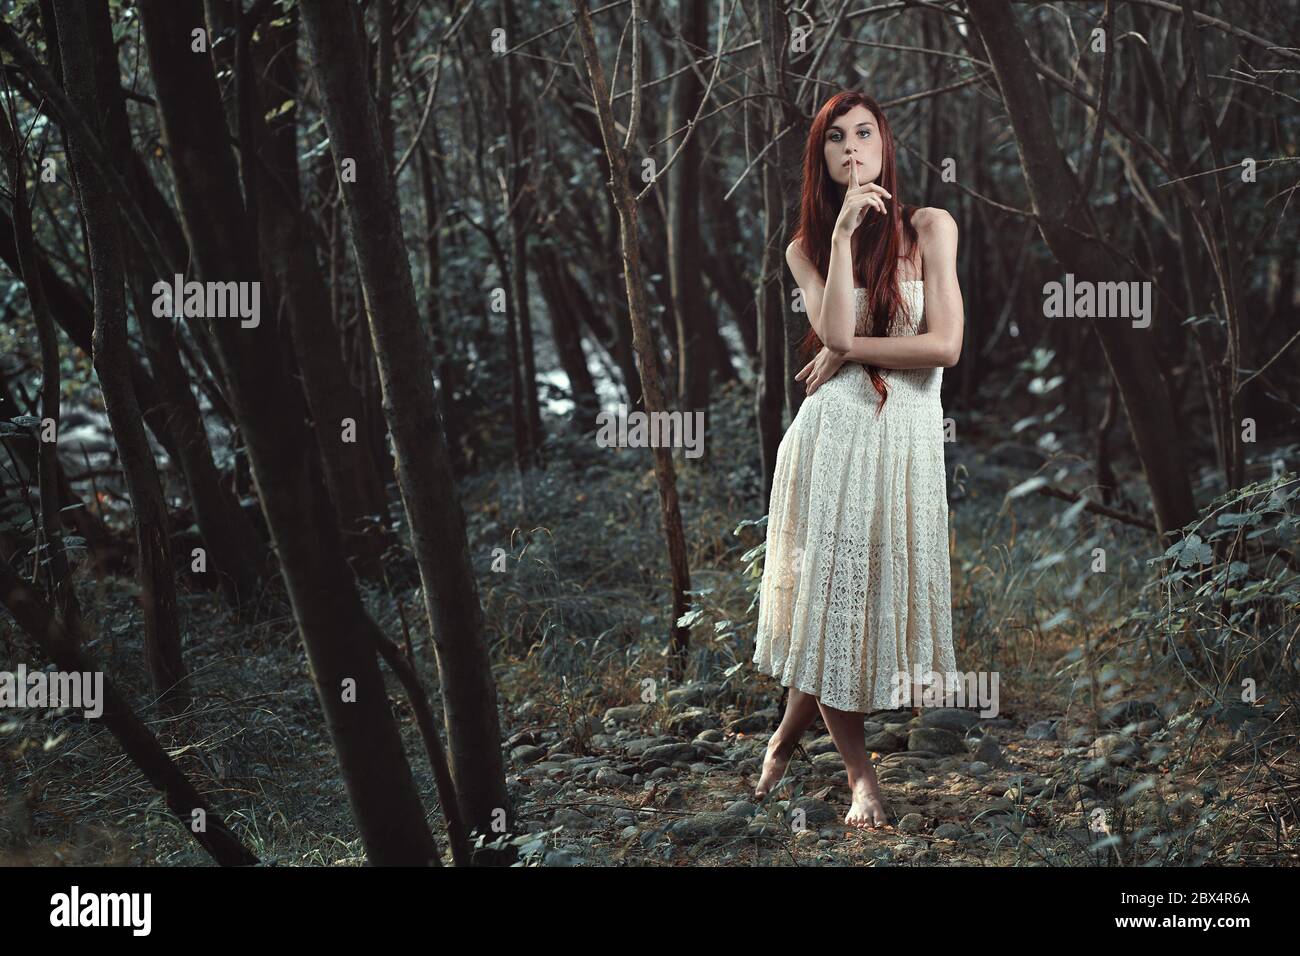 Silence gesture from red hair woman. Surreal forest Stock Photo